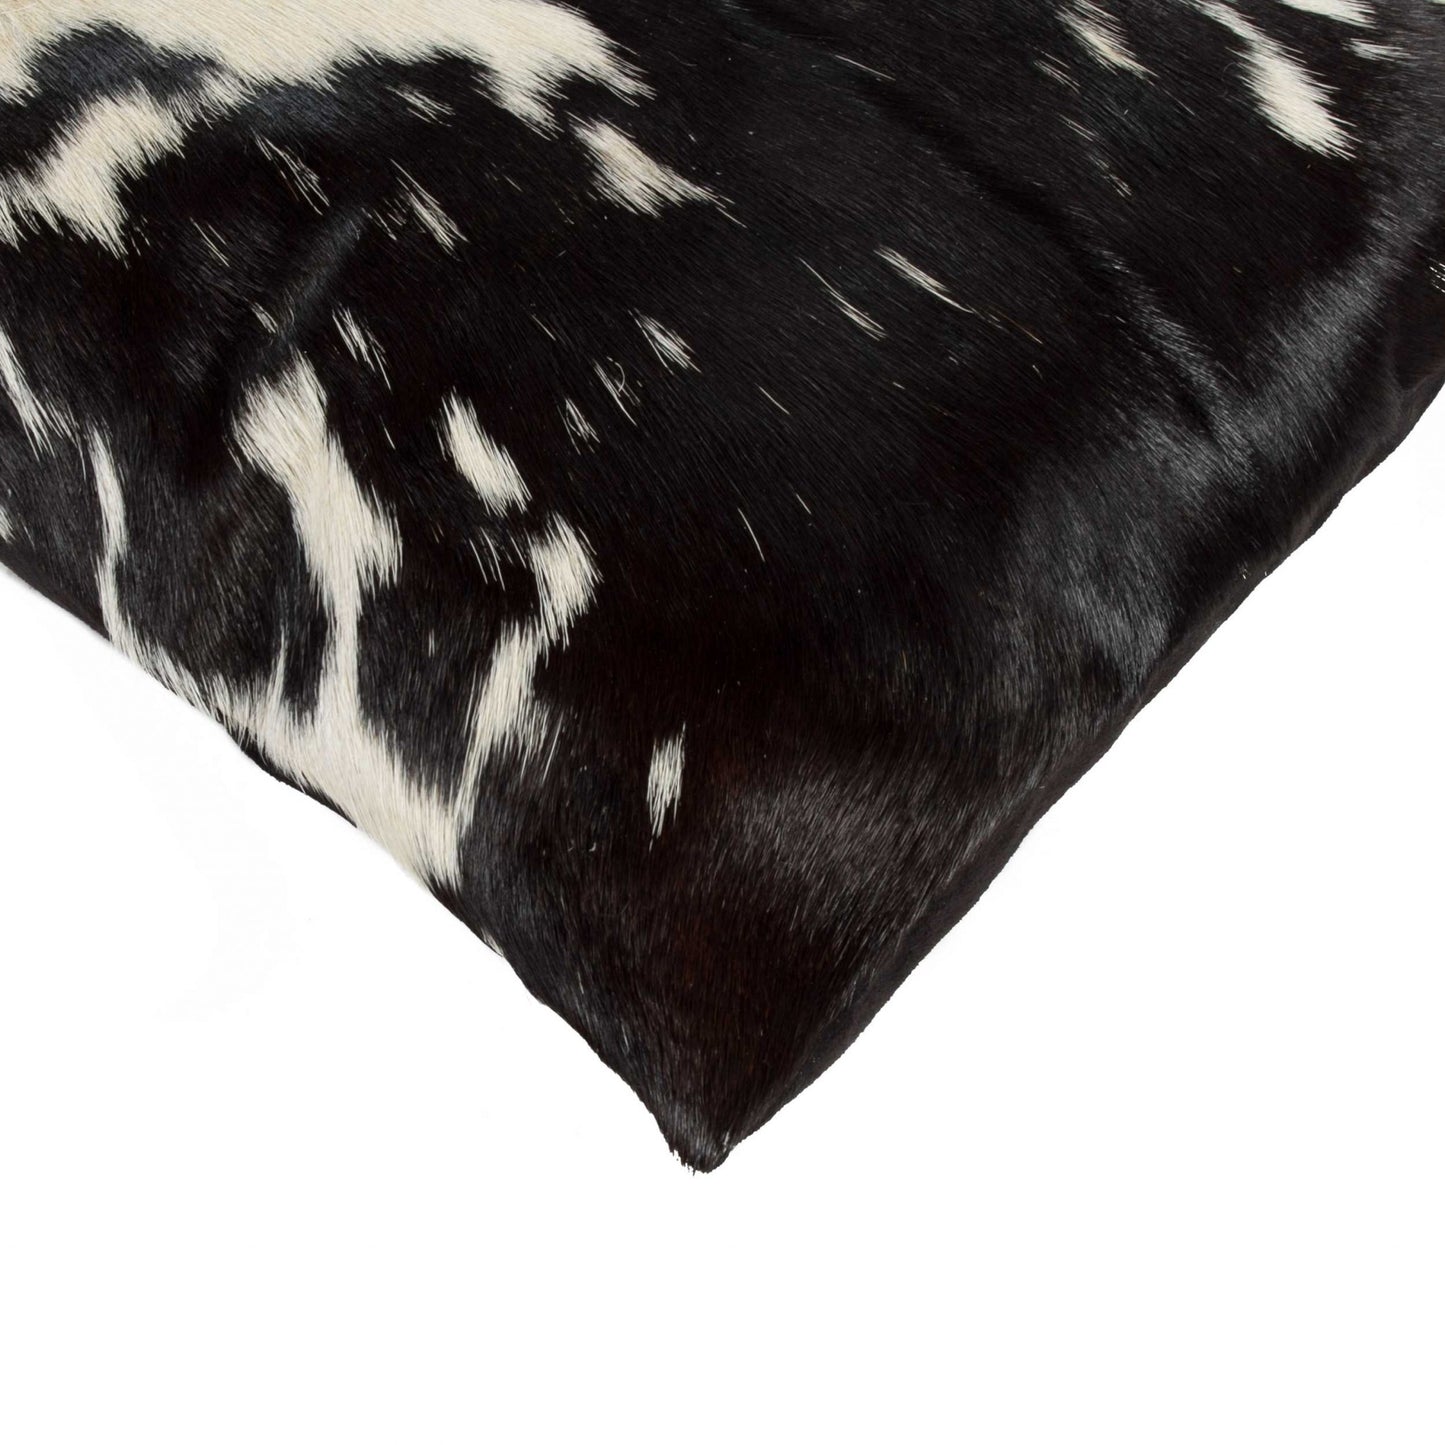 12" X 20" Black and White Cowhide Throw Pillow